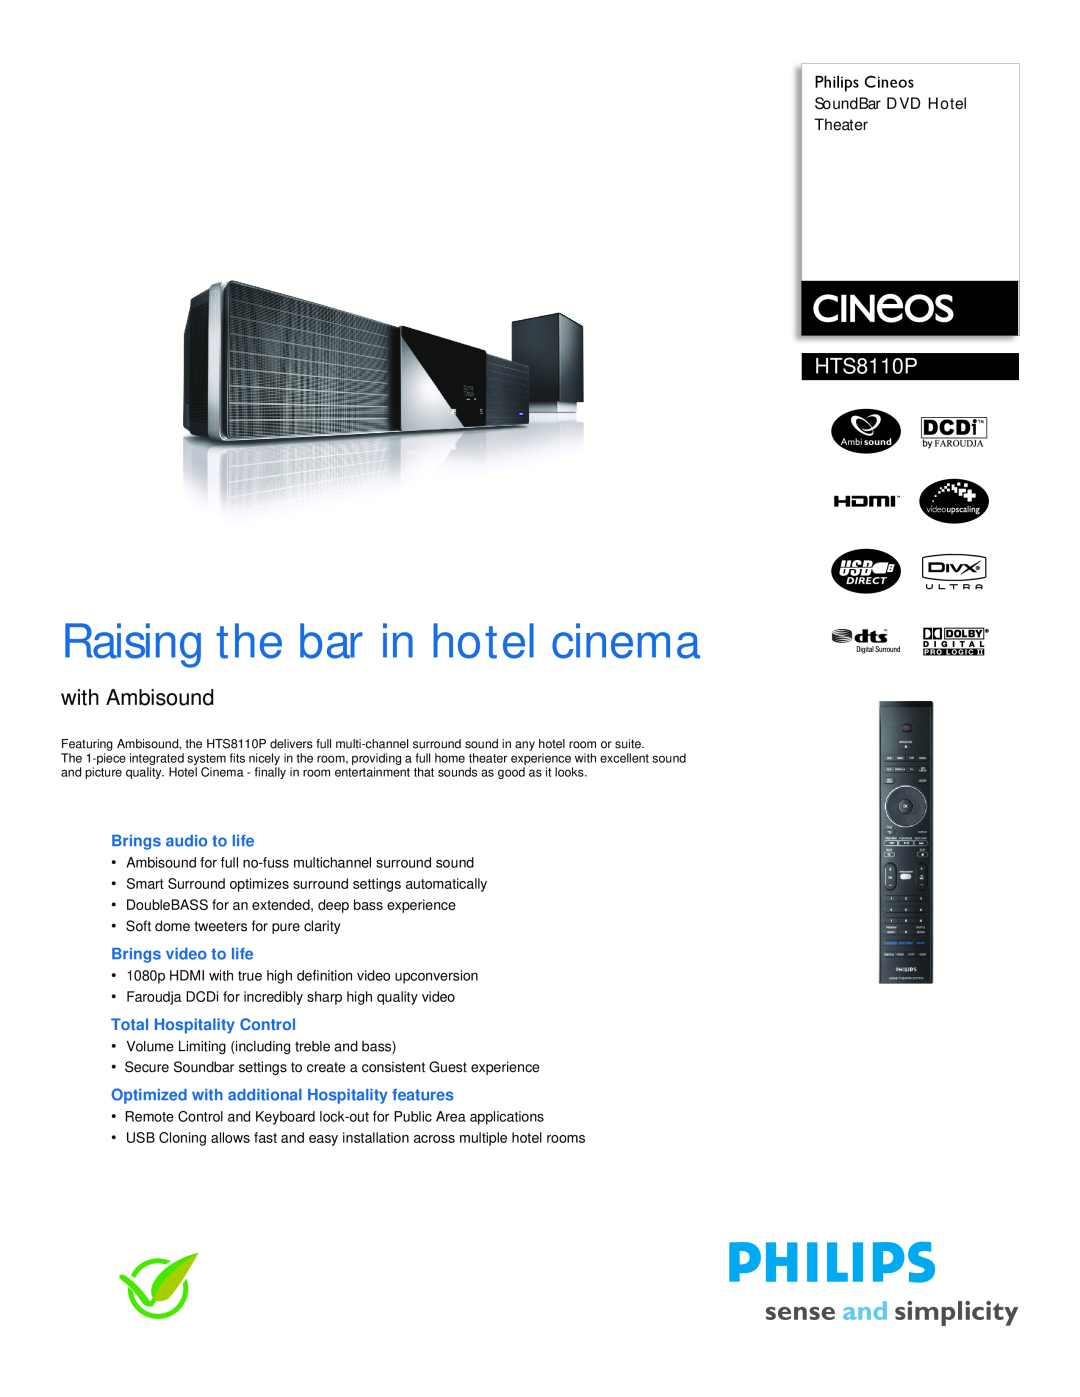 Philips HTS8110P manual Philips Cineos SoundBar DVD Hotel Theater, Brings audio to life, Brings video to life 